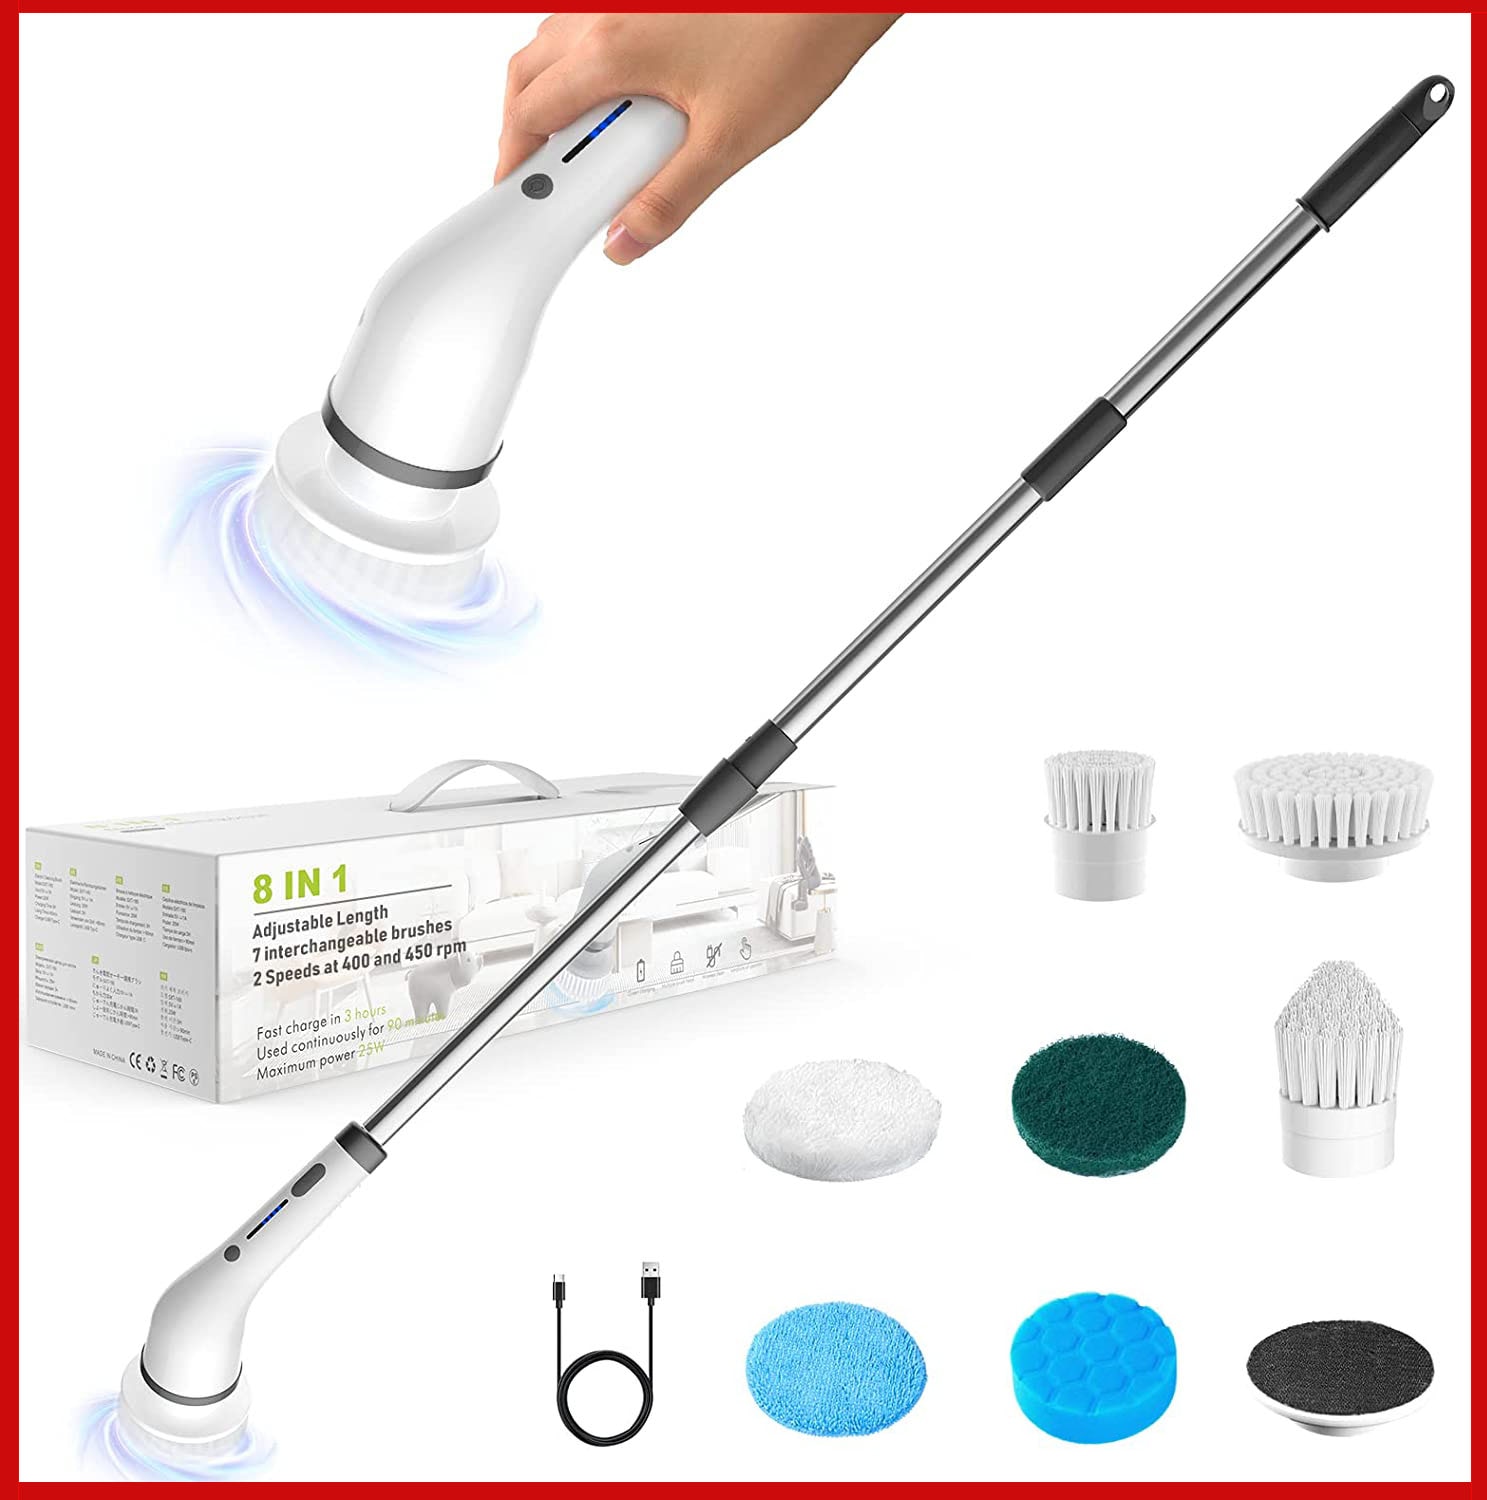 ٱ  û 귯, USB ,  ô 귯, ֹ û ,  û 귯, 8  1 Electric Cleaning Brush